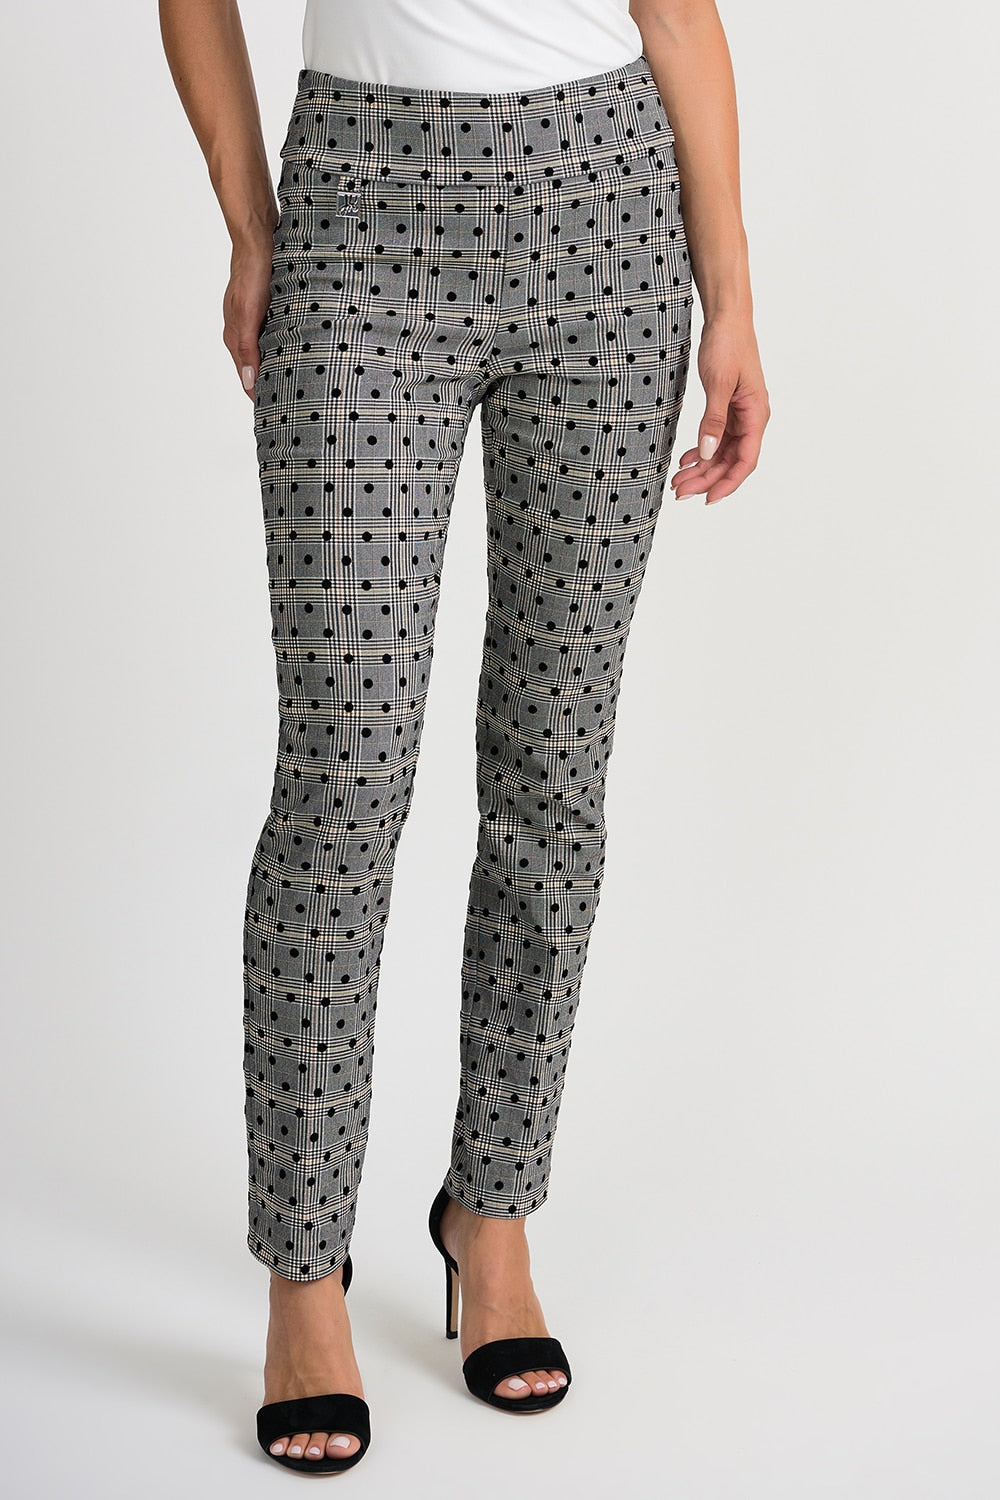 Joseph Ribkoff Pant Style 201647 Black/White/Brown from BelleMiaBoutique.com 